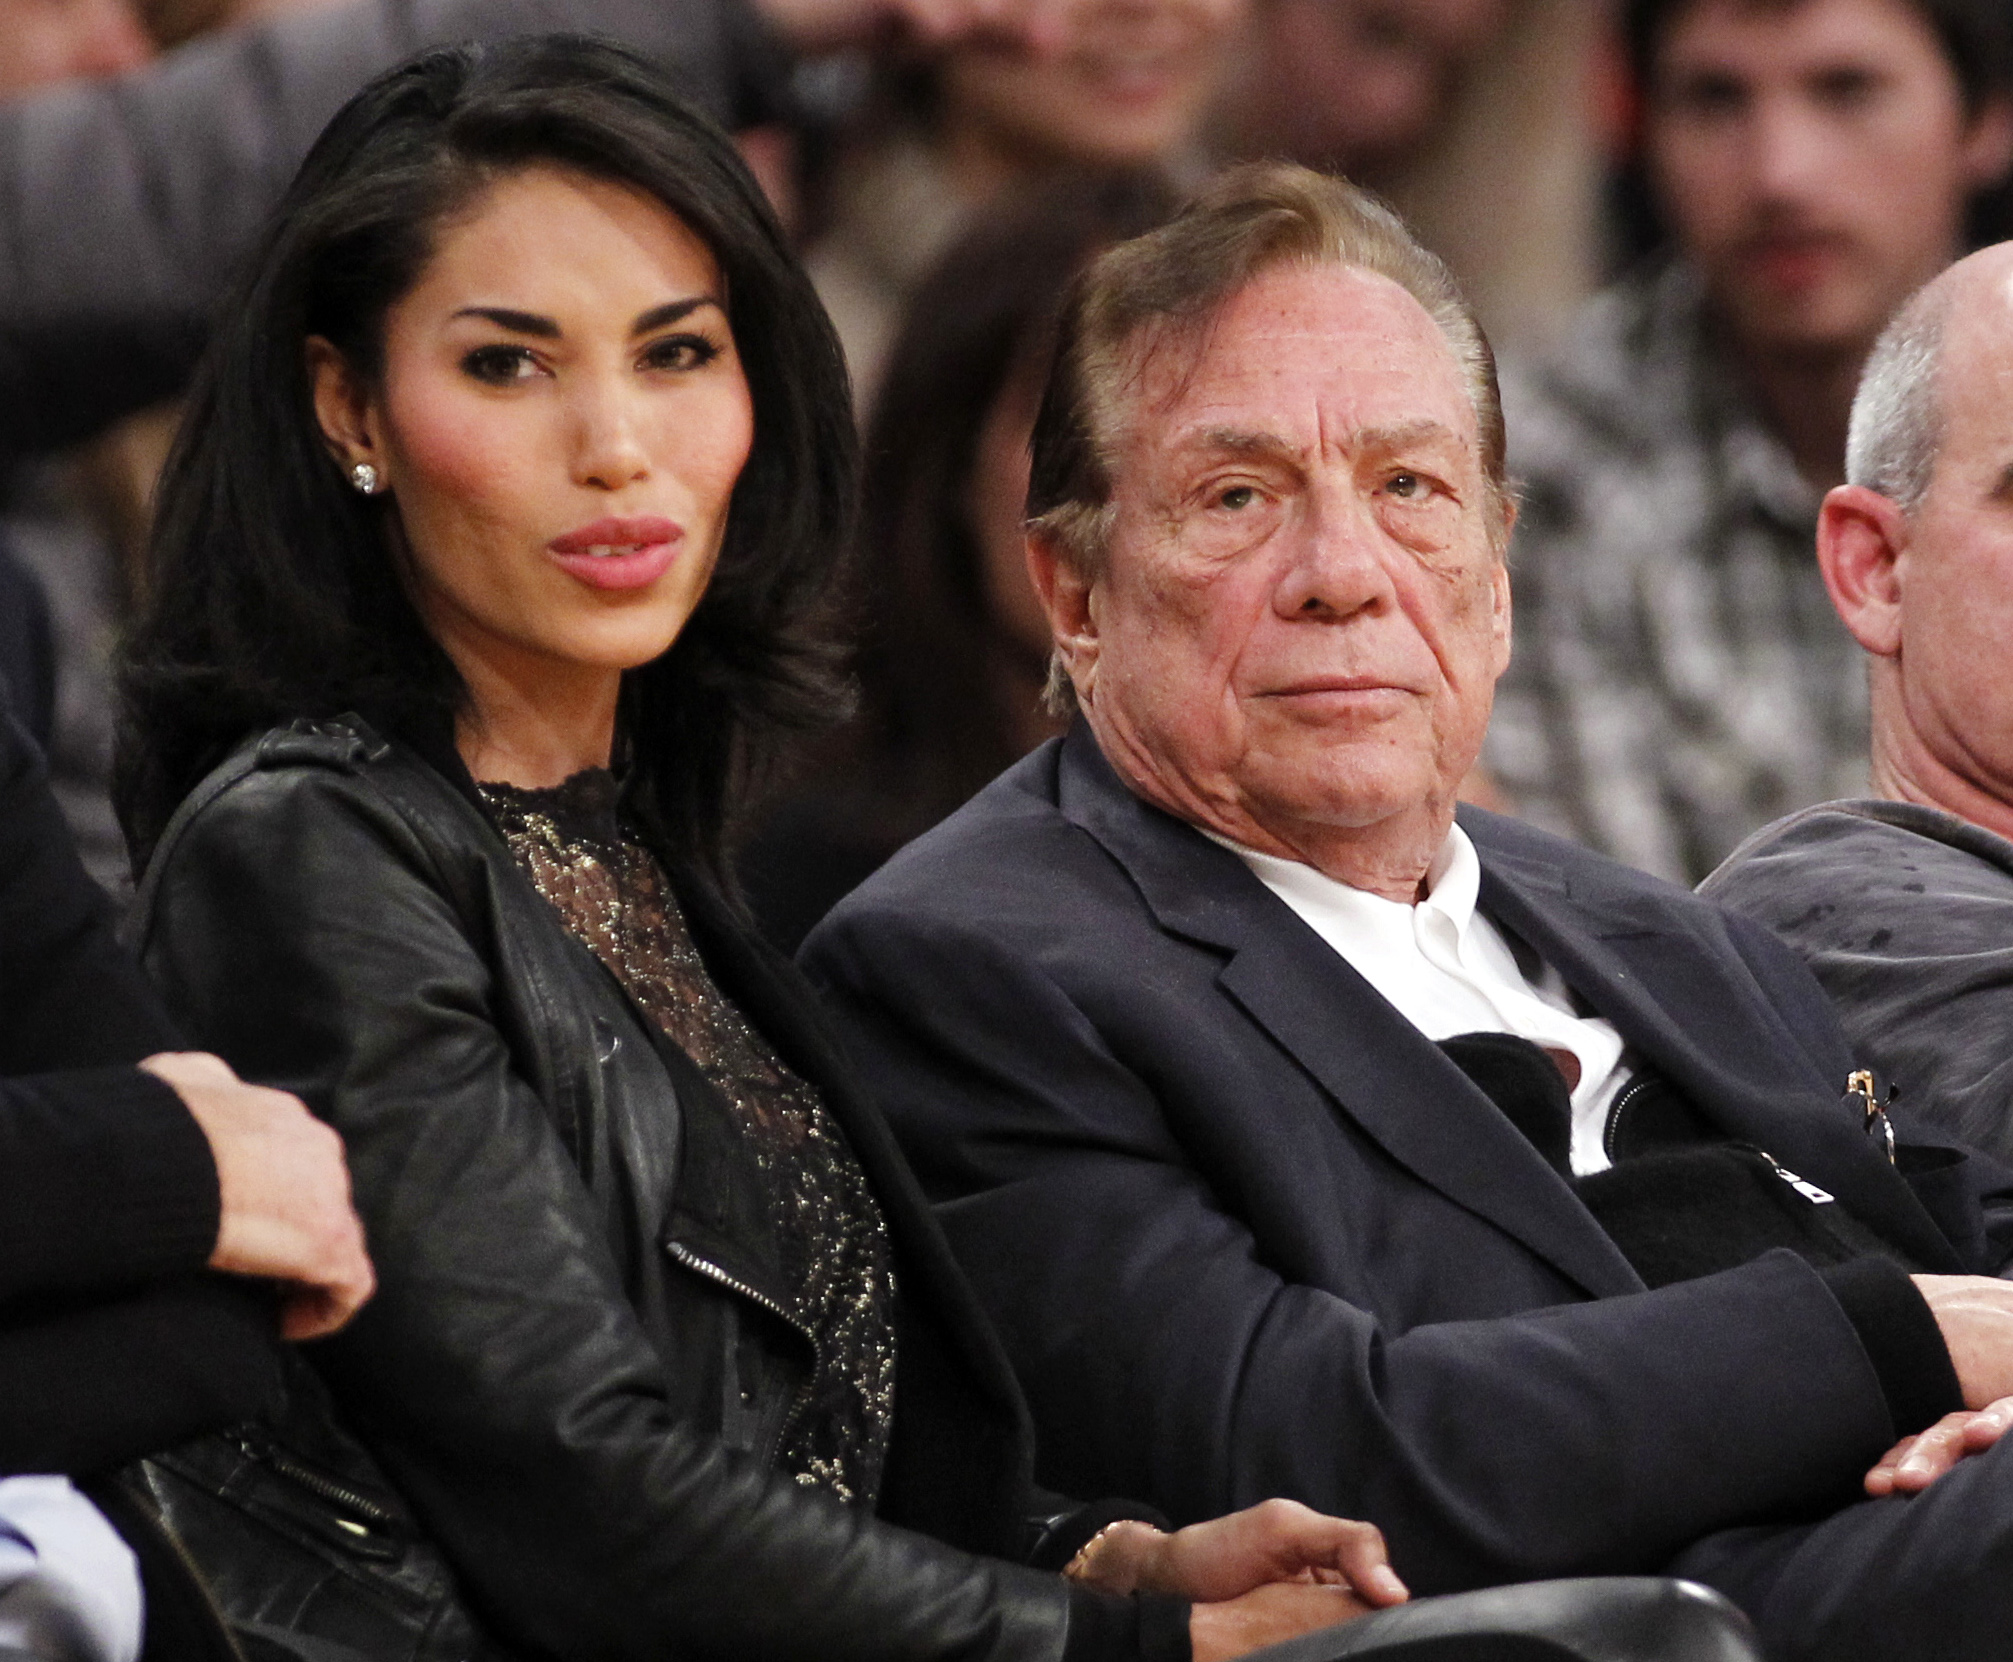 PHOTO: Los Angeles Clippers owner Donald Sterling, third right, sits with V. Stiviano, left, as  they watch the Clippers play the Los Angeles Lakers during an NBA preseason basketball game in Los Angeles, Calif., Dec. 19, 2010.